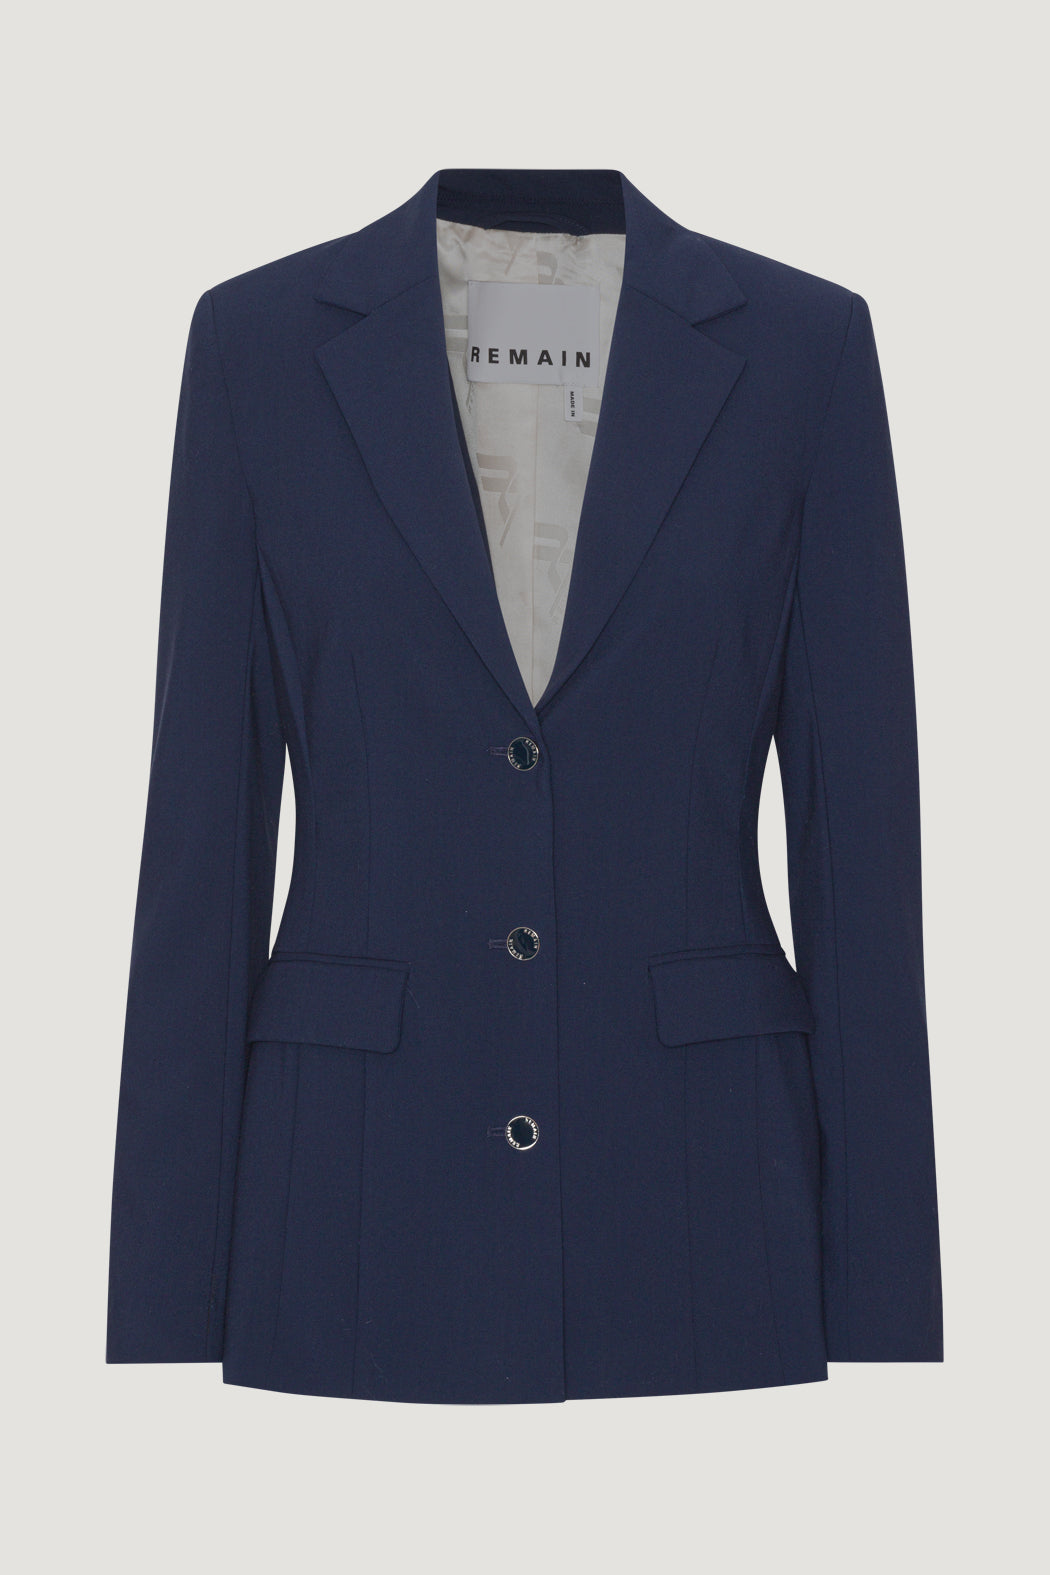 Remain Fitted Suiting Blazer